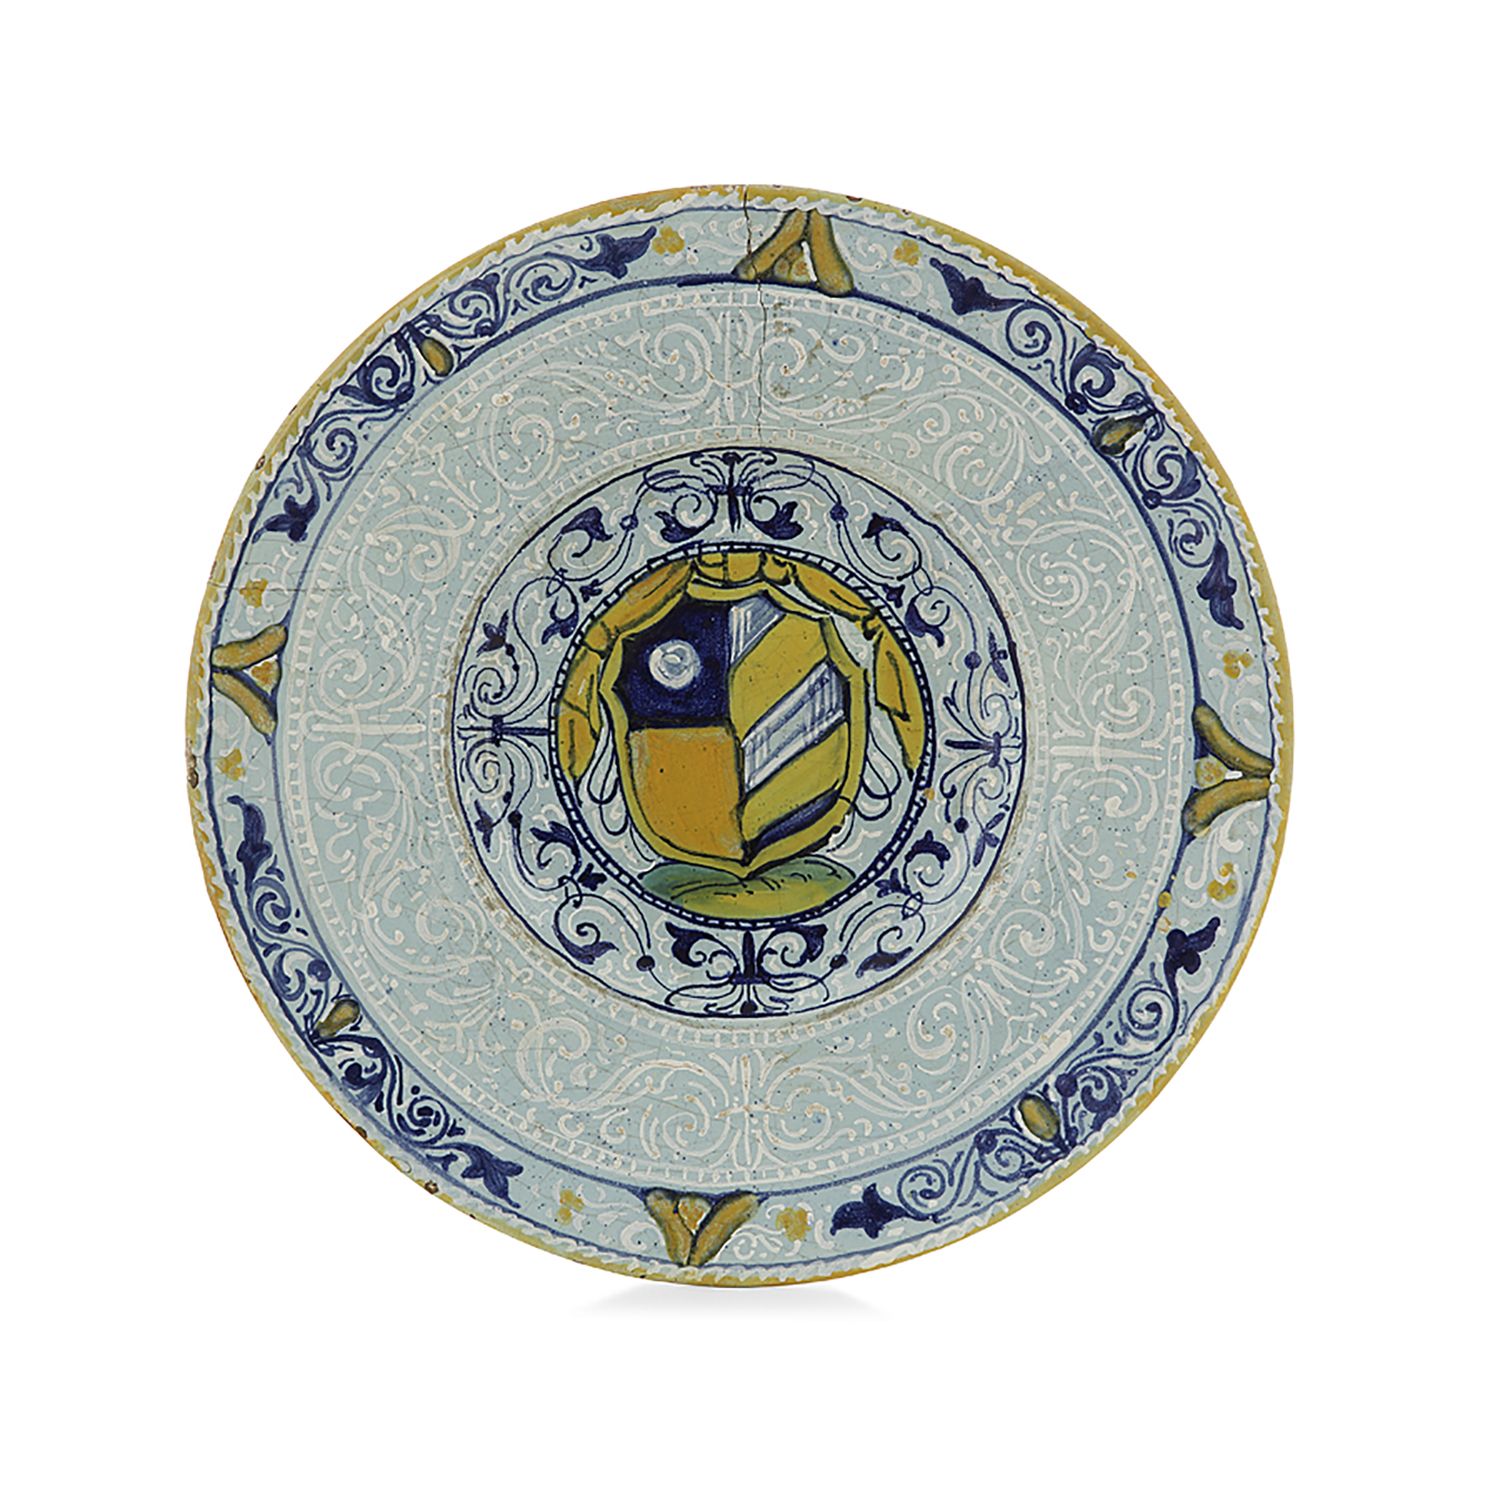 Null small round dish, italy, in the 16th century style

in majolica with polych&hellip;